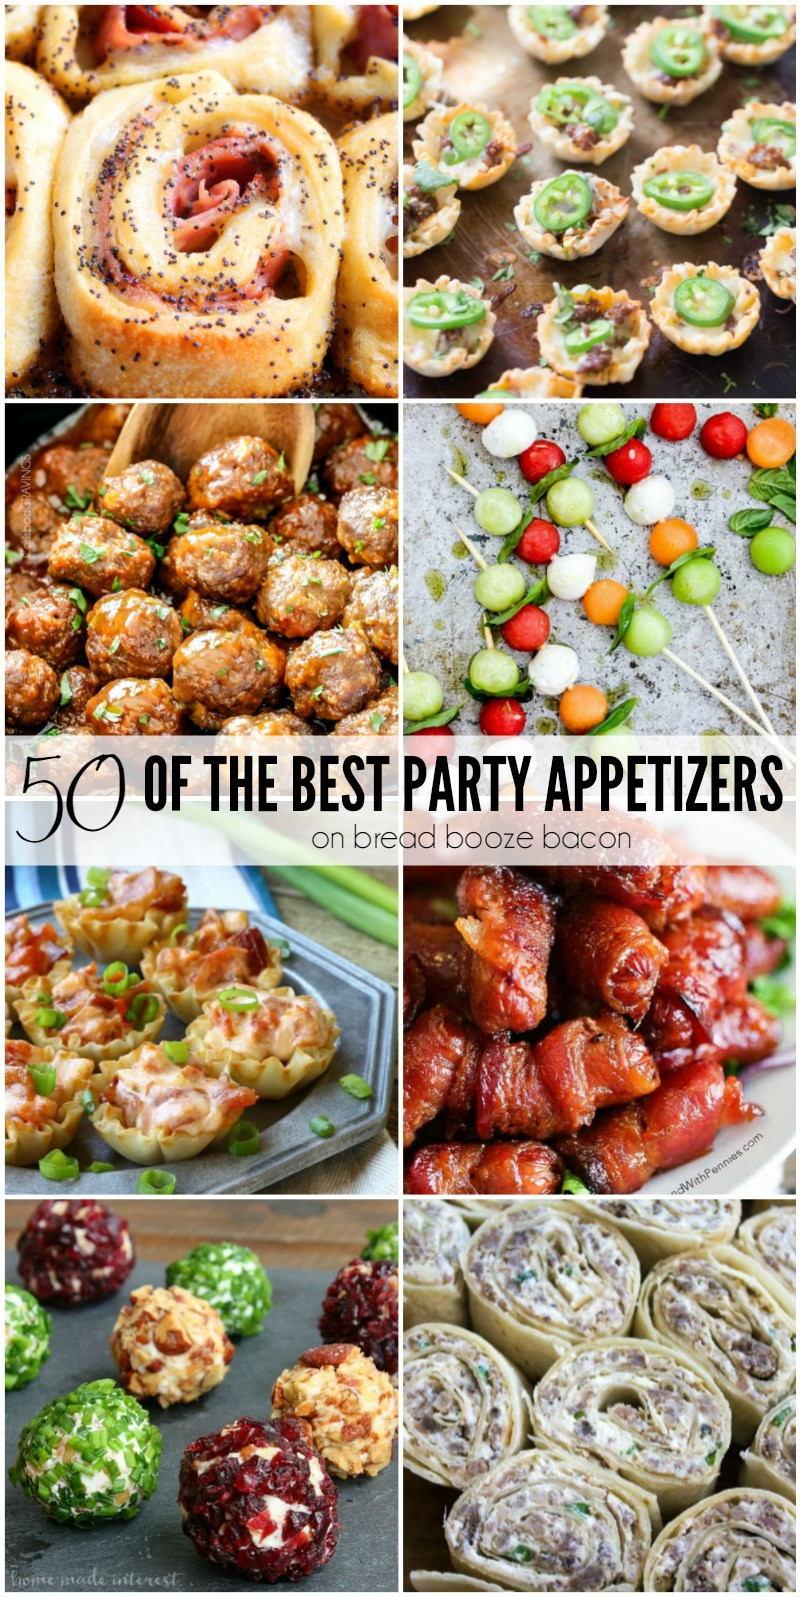 Good Appetizers For Christmas Party
 50 of the Best Party Appetizers • Bread Booze Bacon